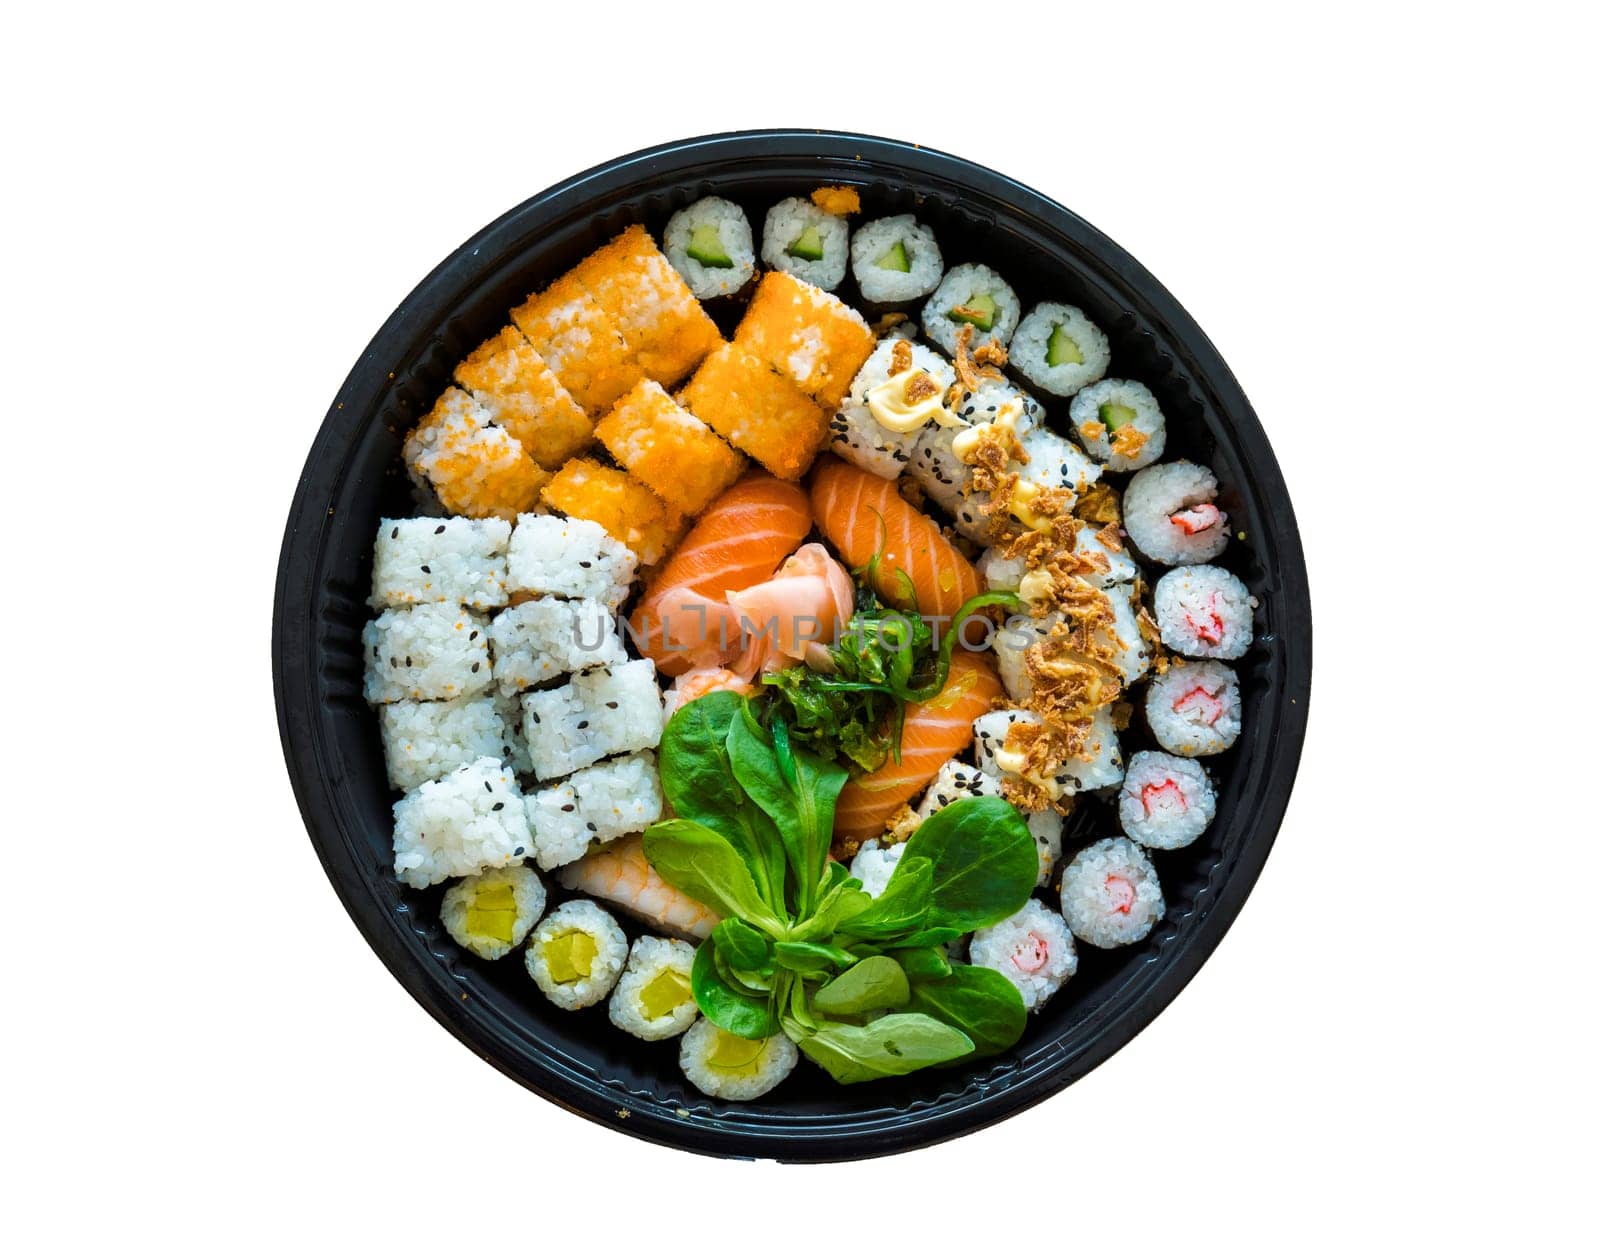 A fresh platter of sushi by compuinfoto